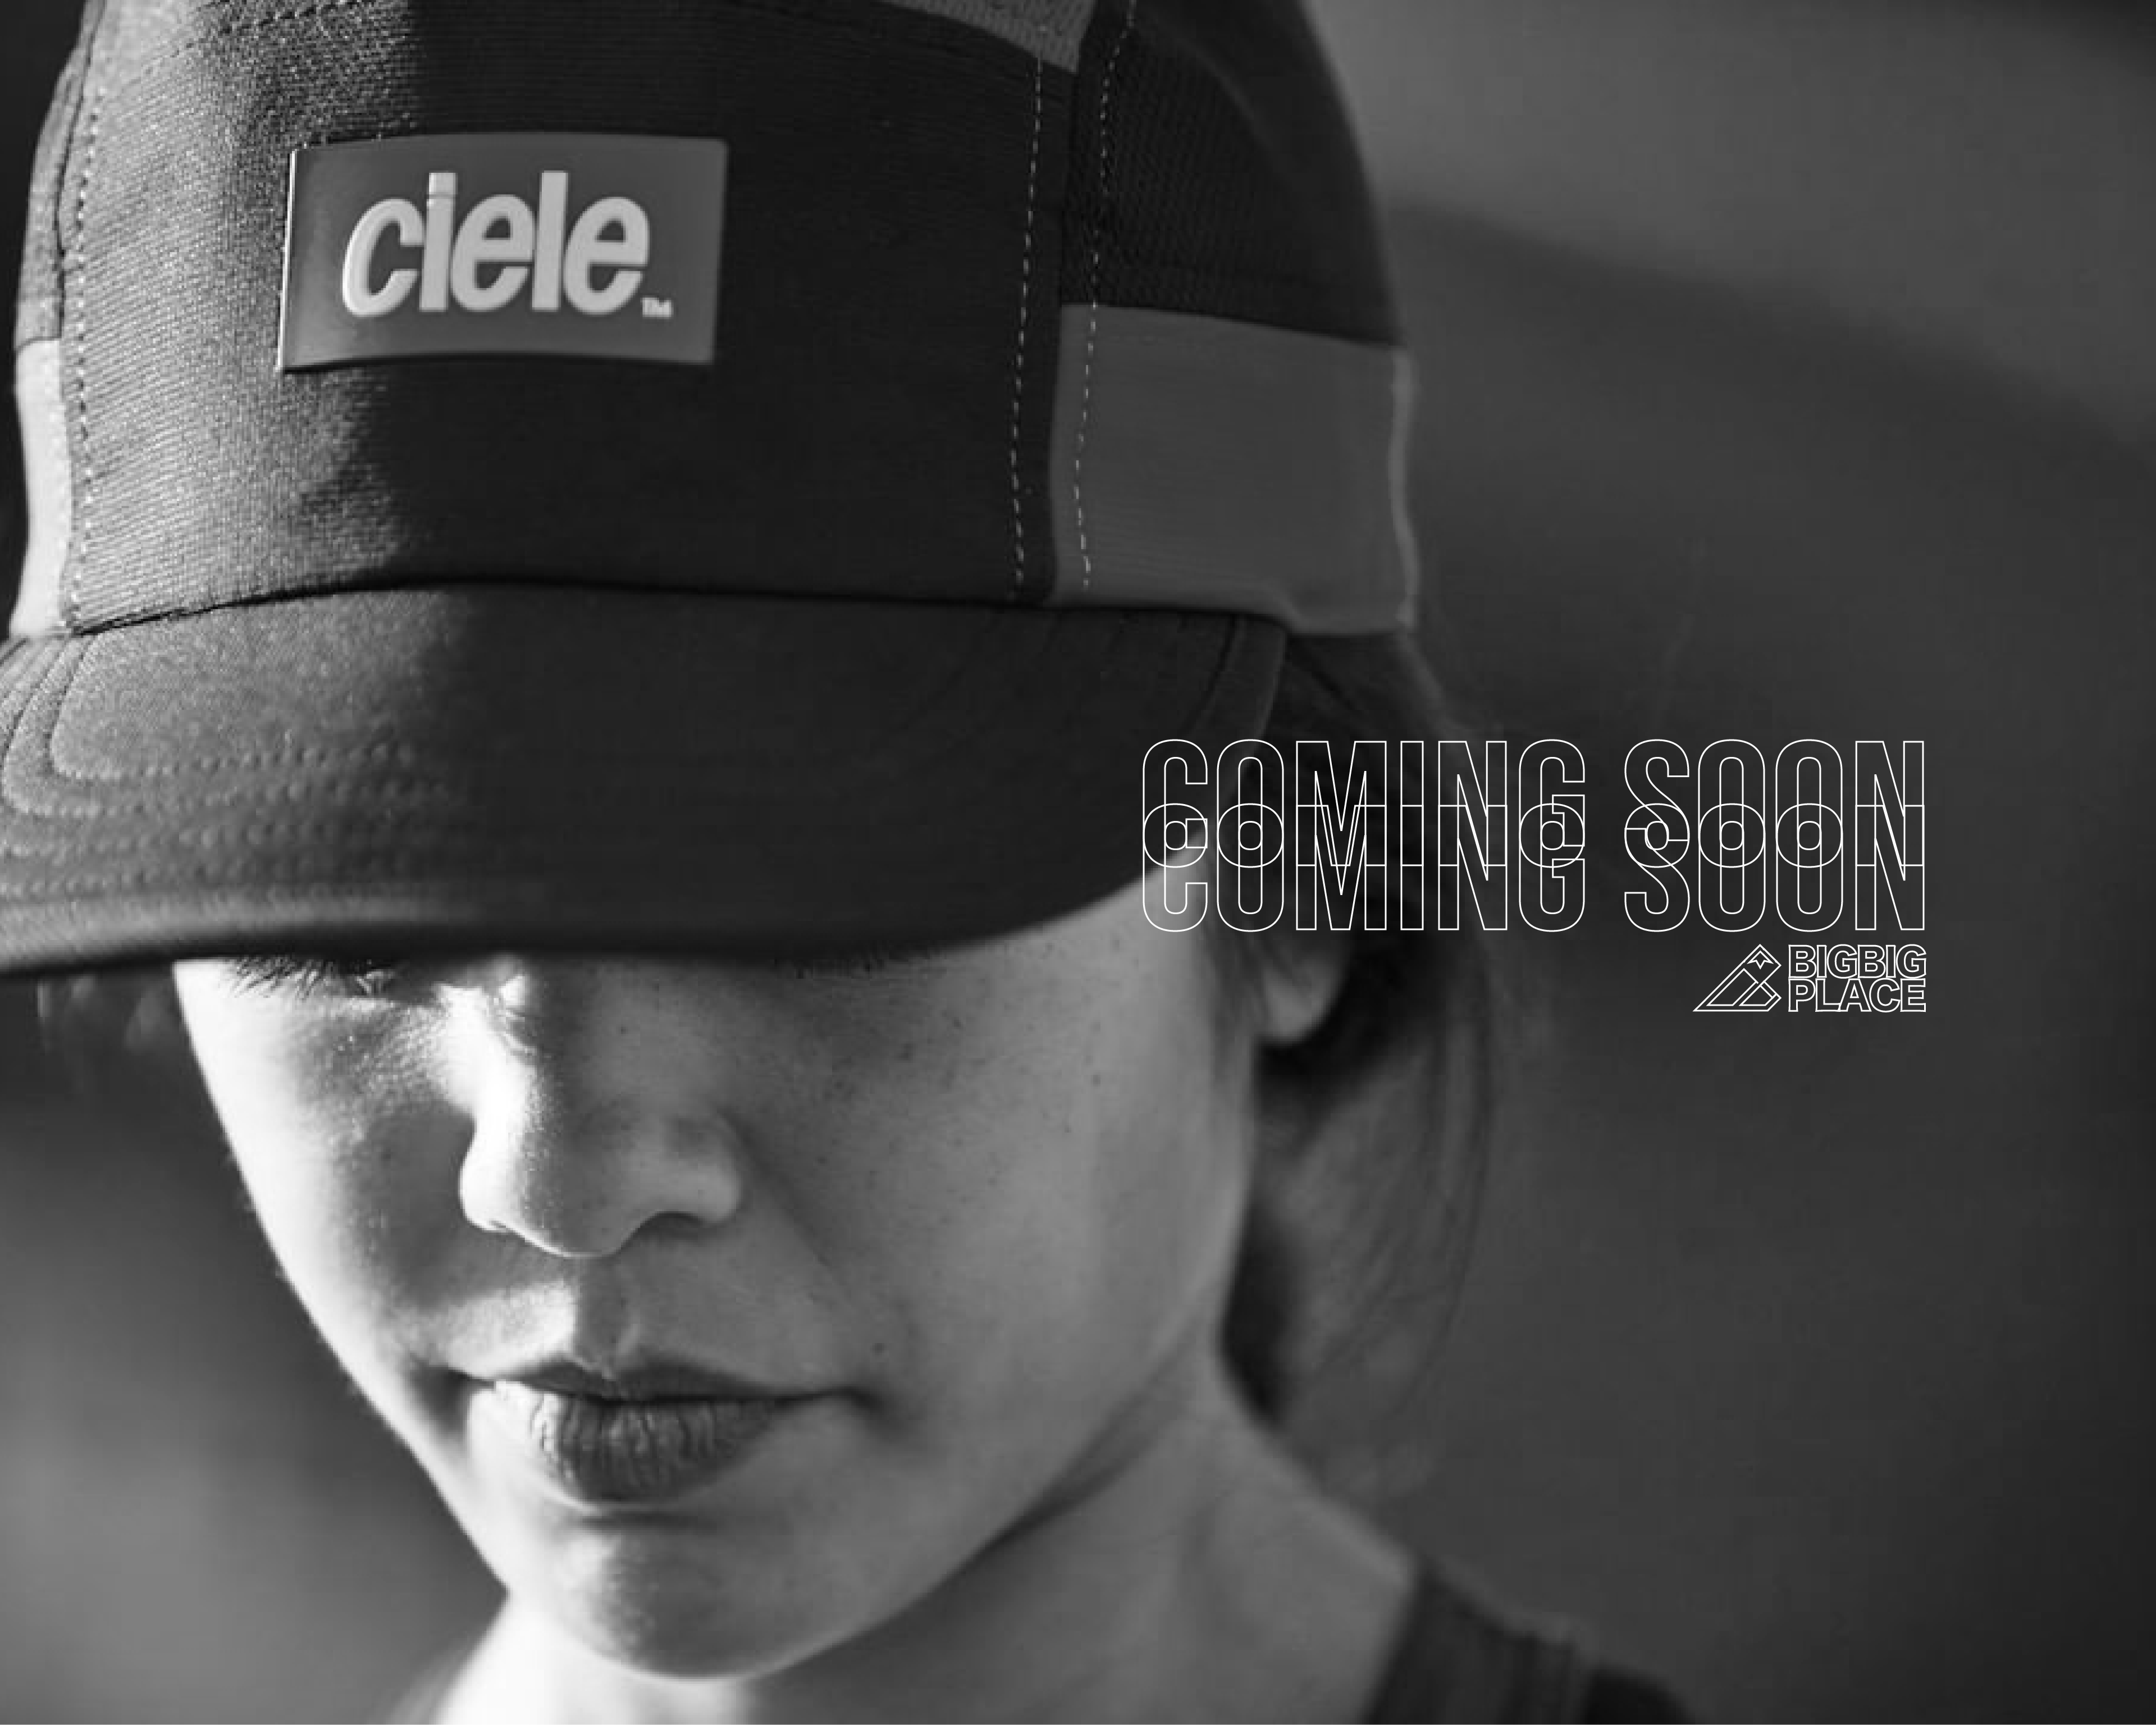 Look up the Ciele, a Running Cap more than just a cap